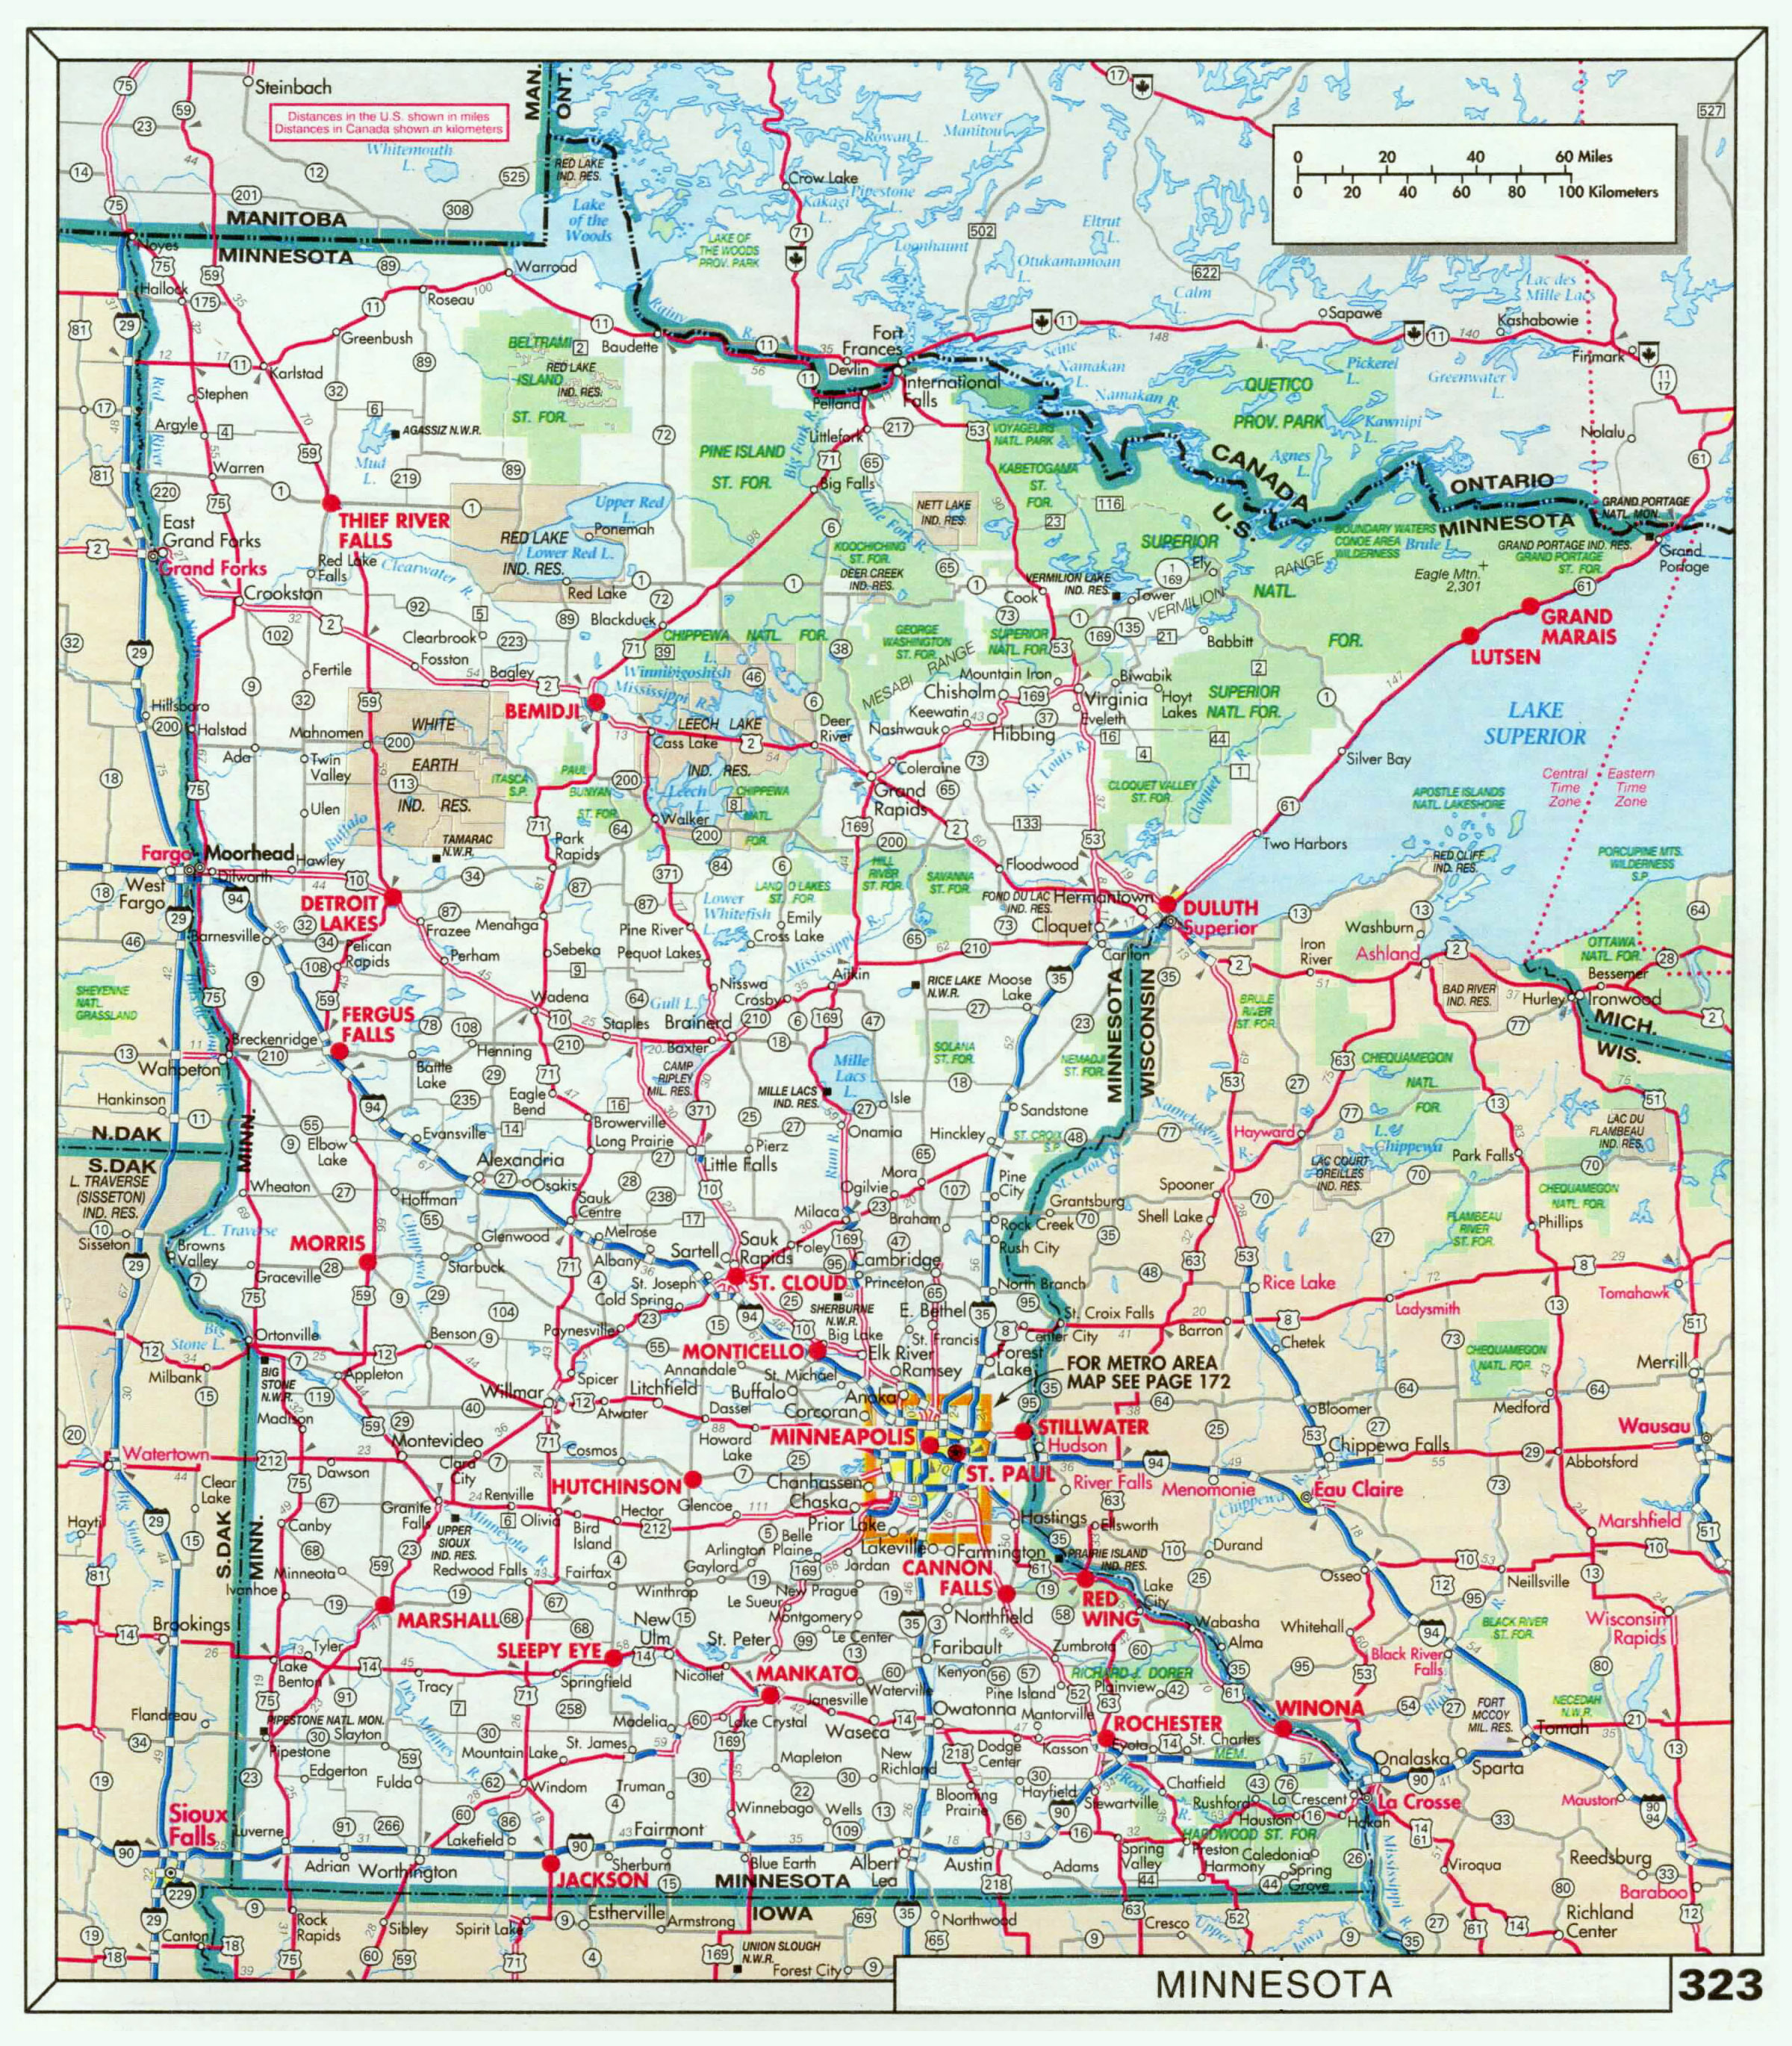 large-detailed-roads-and-highways-map-of-minnesota-state-with-national